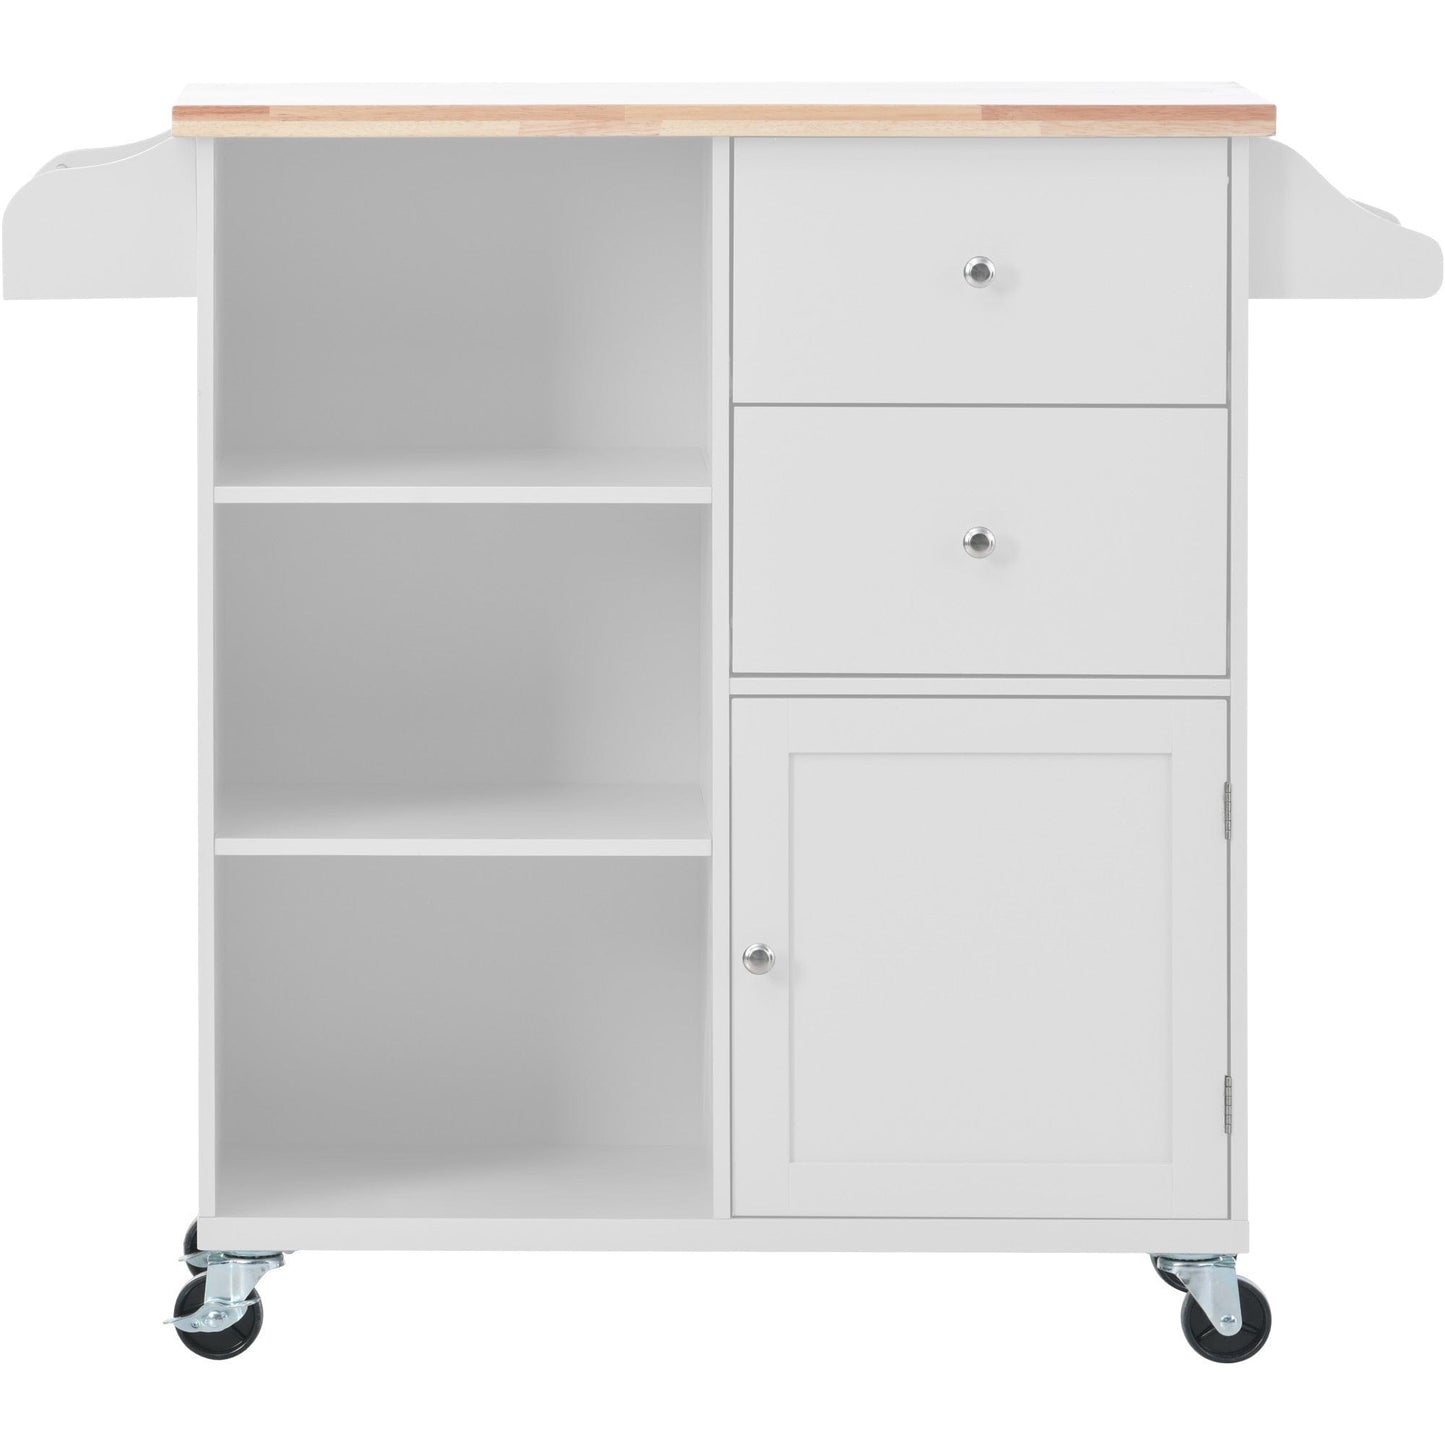 1st Choice Furniture Direct Kitchen Cart 1st Choice 4 Wheels Dining Room Kitchen Cart with Drawers & Shelves